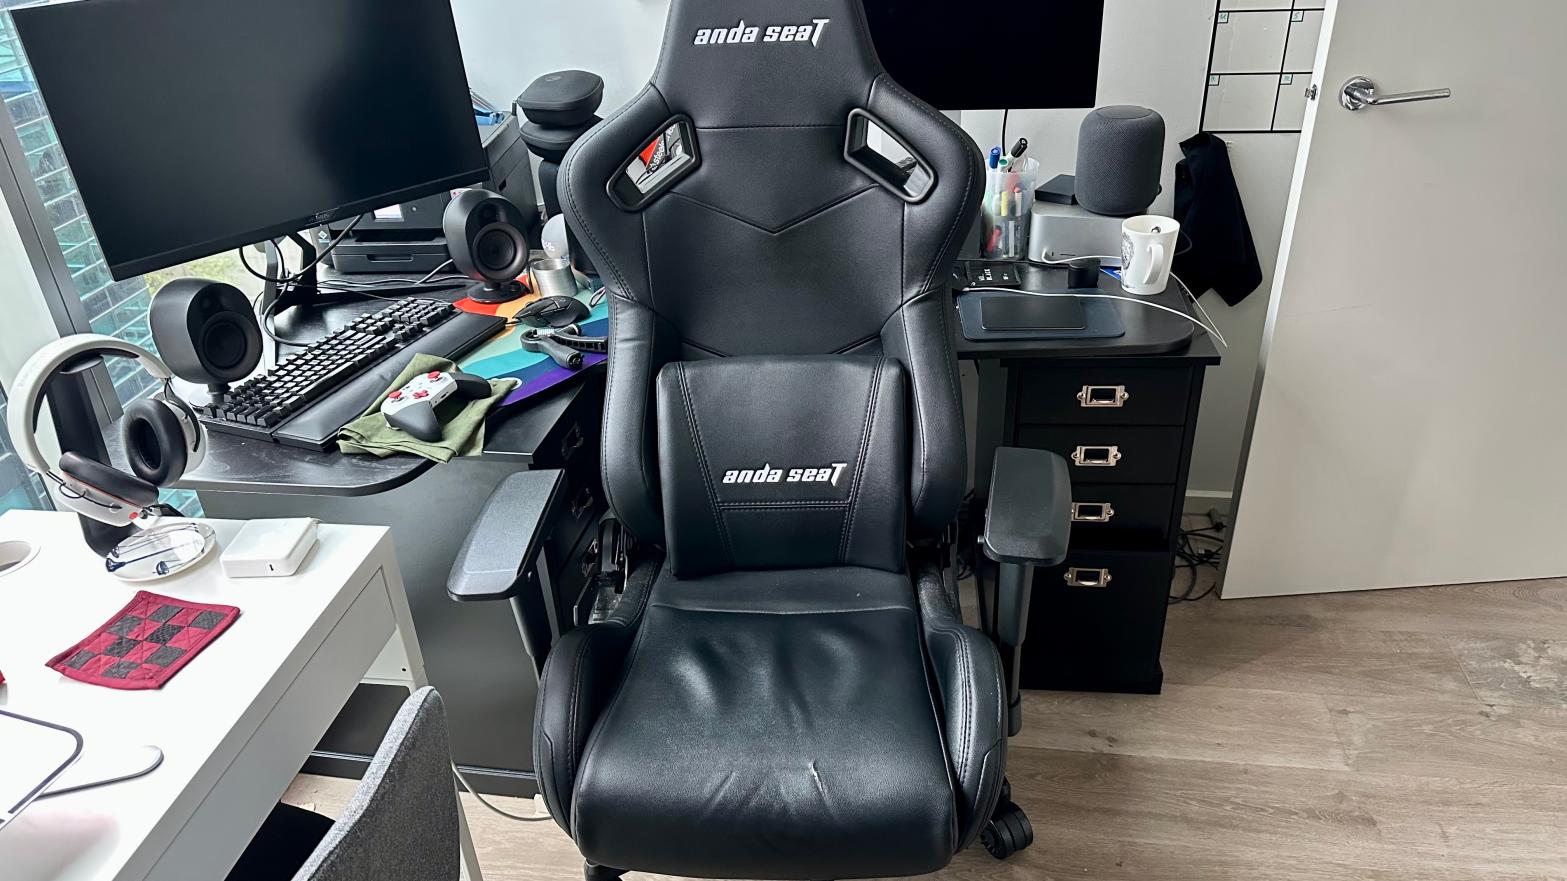 A gamer chair with a cracked seat in a messy home office. Don't judge me.